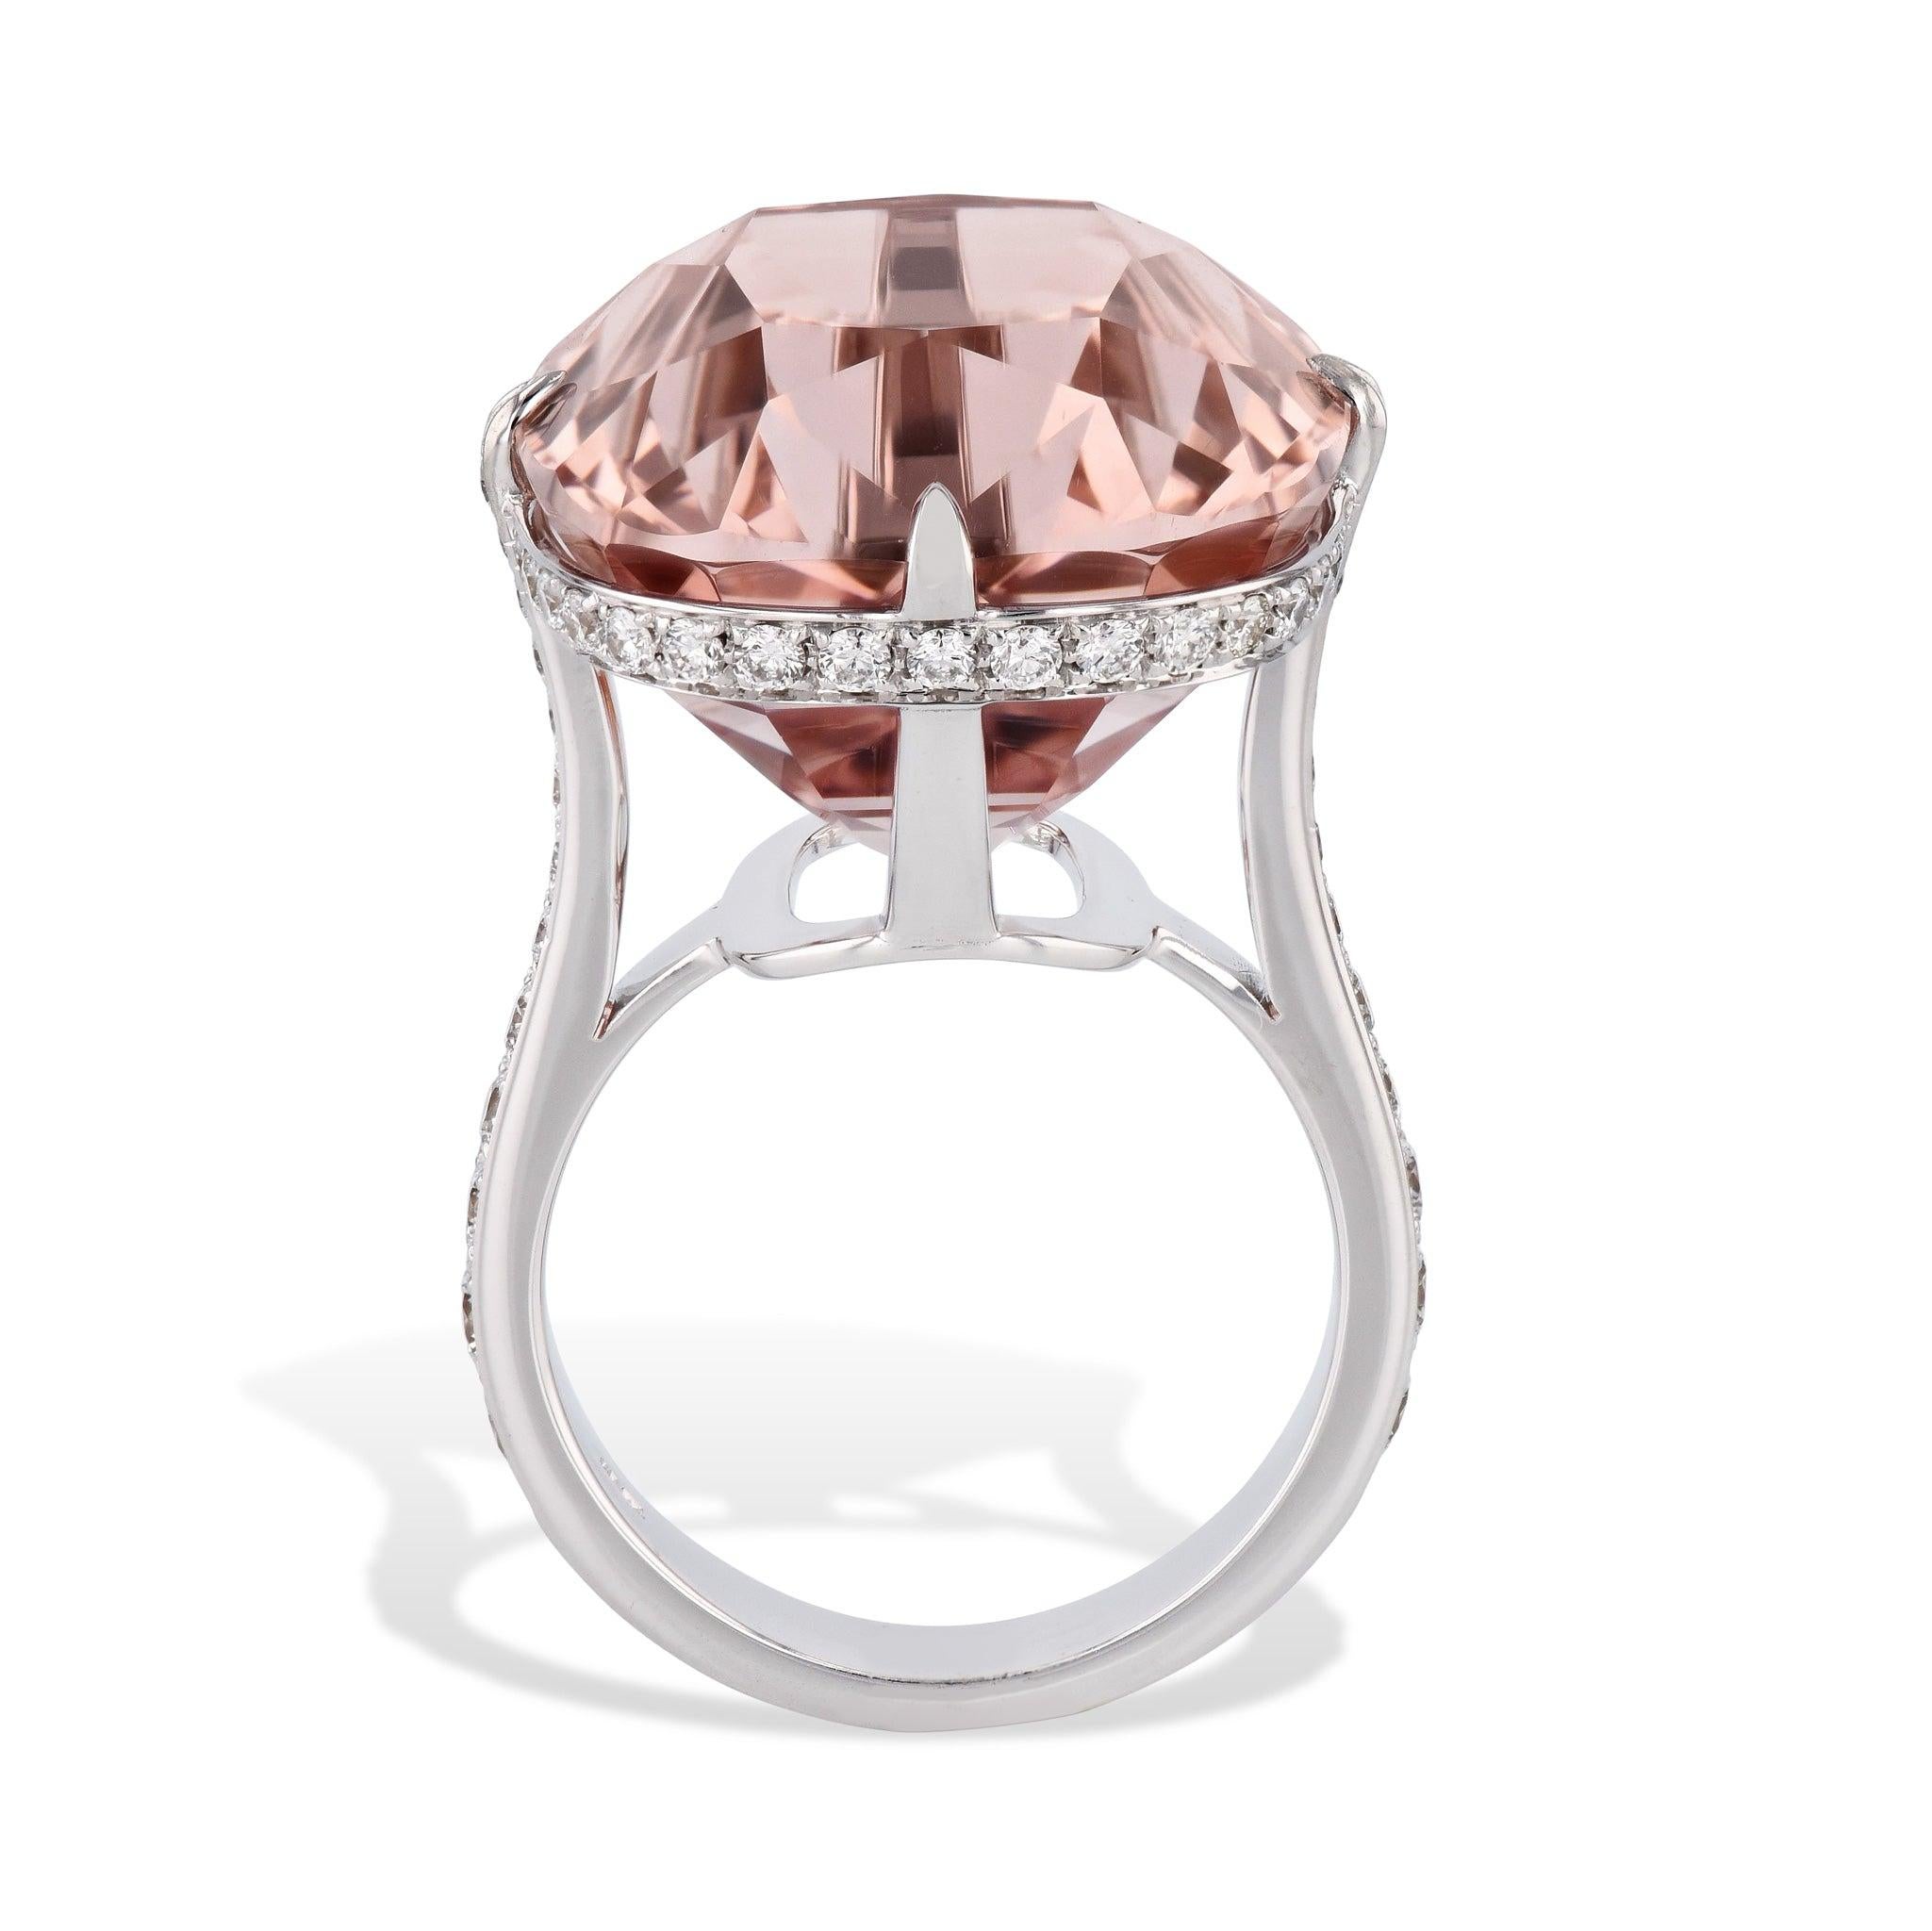 Marvel at the breathtaking beauty of this stunning 18kt. white gold Cushion Cut Morganite Diamond White Gold Ring! As a centerpiece, it holds a 39.18 carat cushion cut Morganite, gracefully accompanied by diamond pave. A must-have size 8.25 handmade